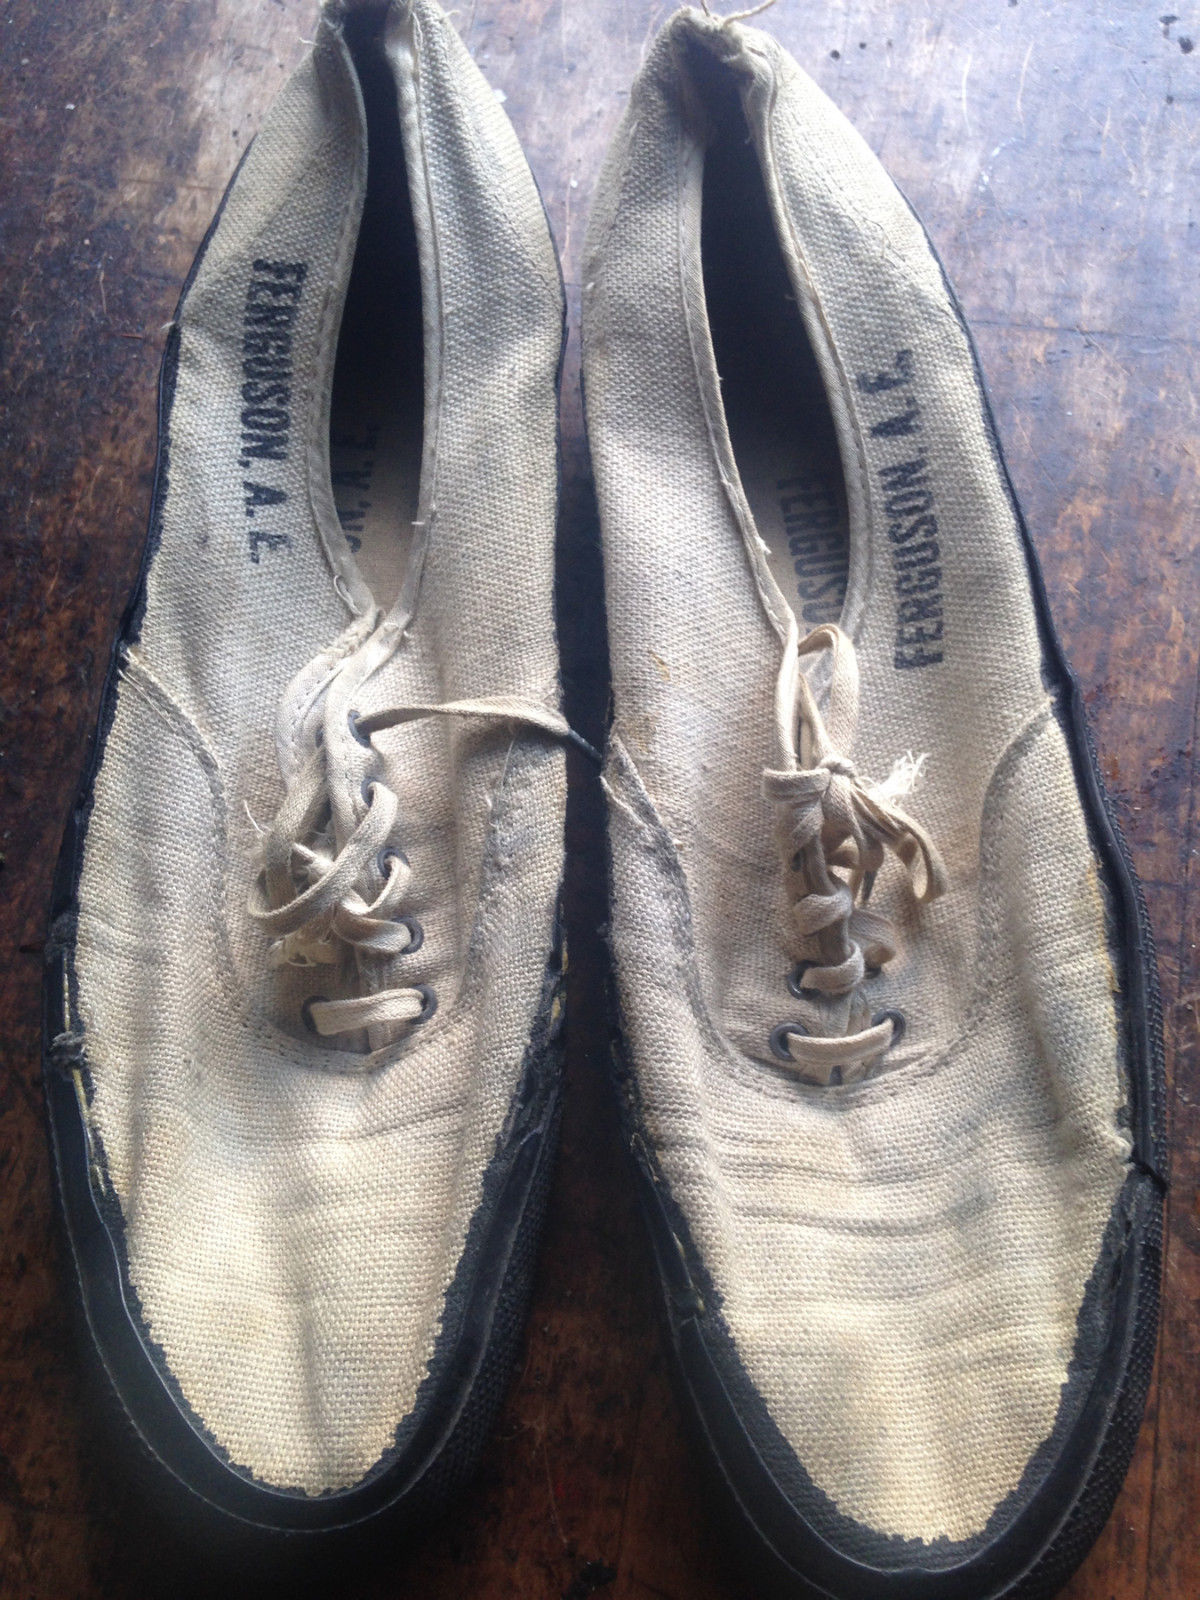 Nostalgia on Wheels: WWII USN Deck Shoes / Sneakers